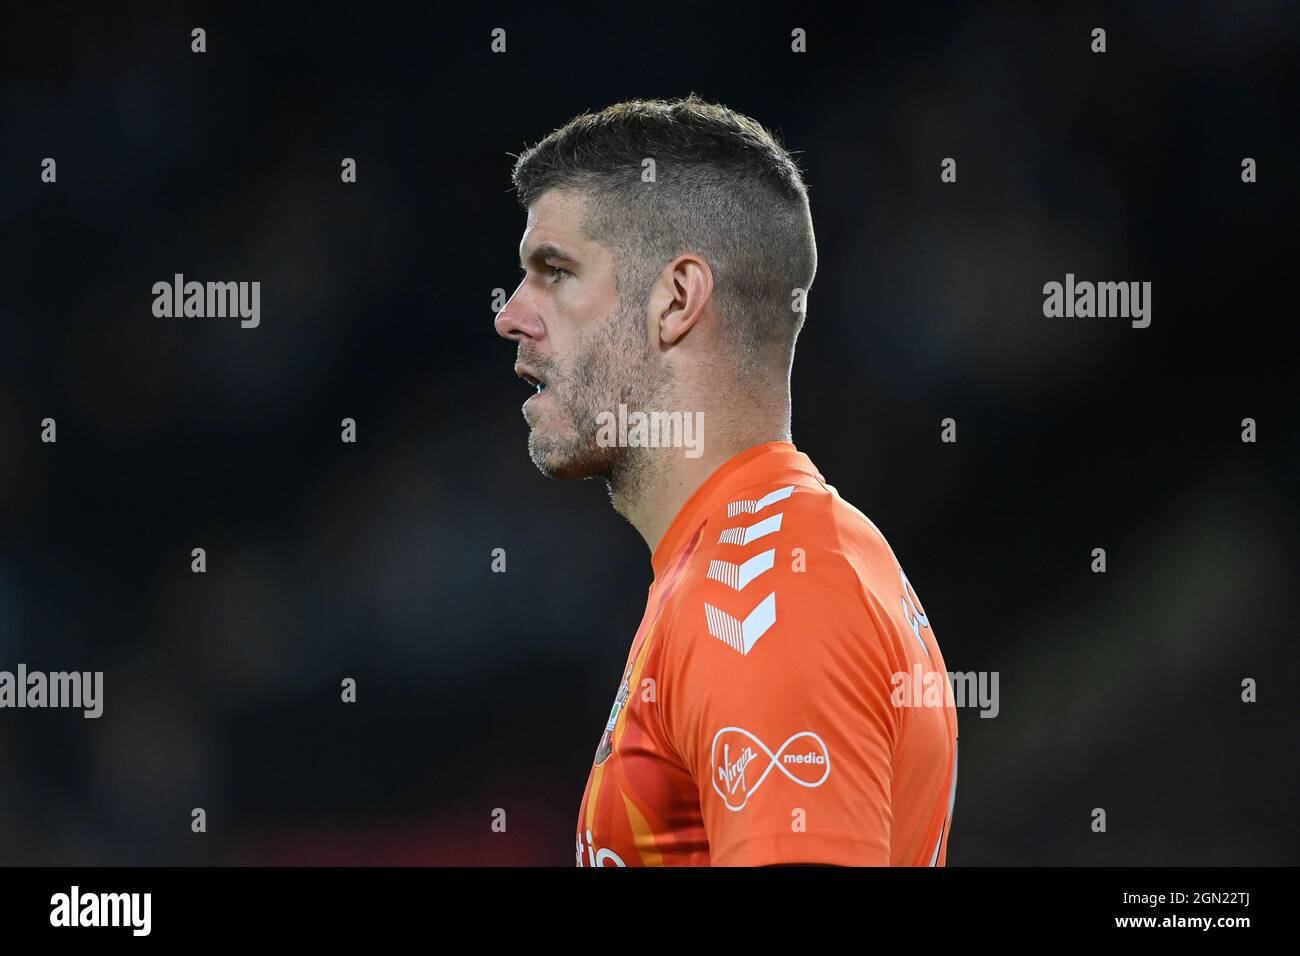 Fraser Forster #44 of Southampton during the game in ,  on 9/21/2021. (Photo by Craig Thomas/News Images/Sipa USA) Stock Photo